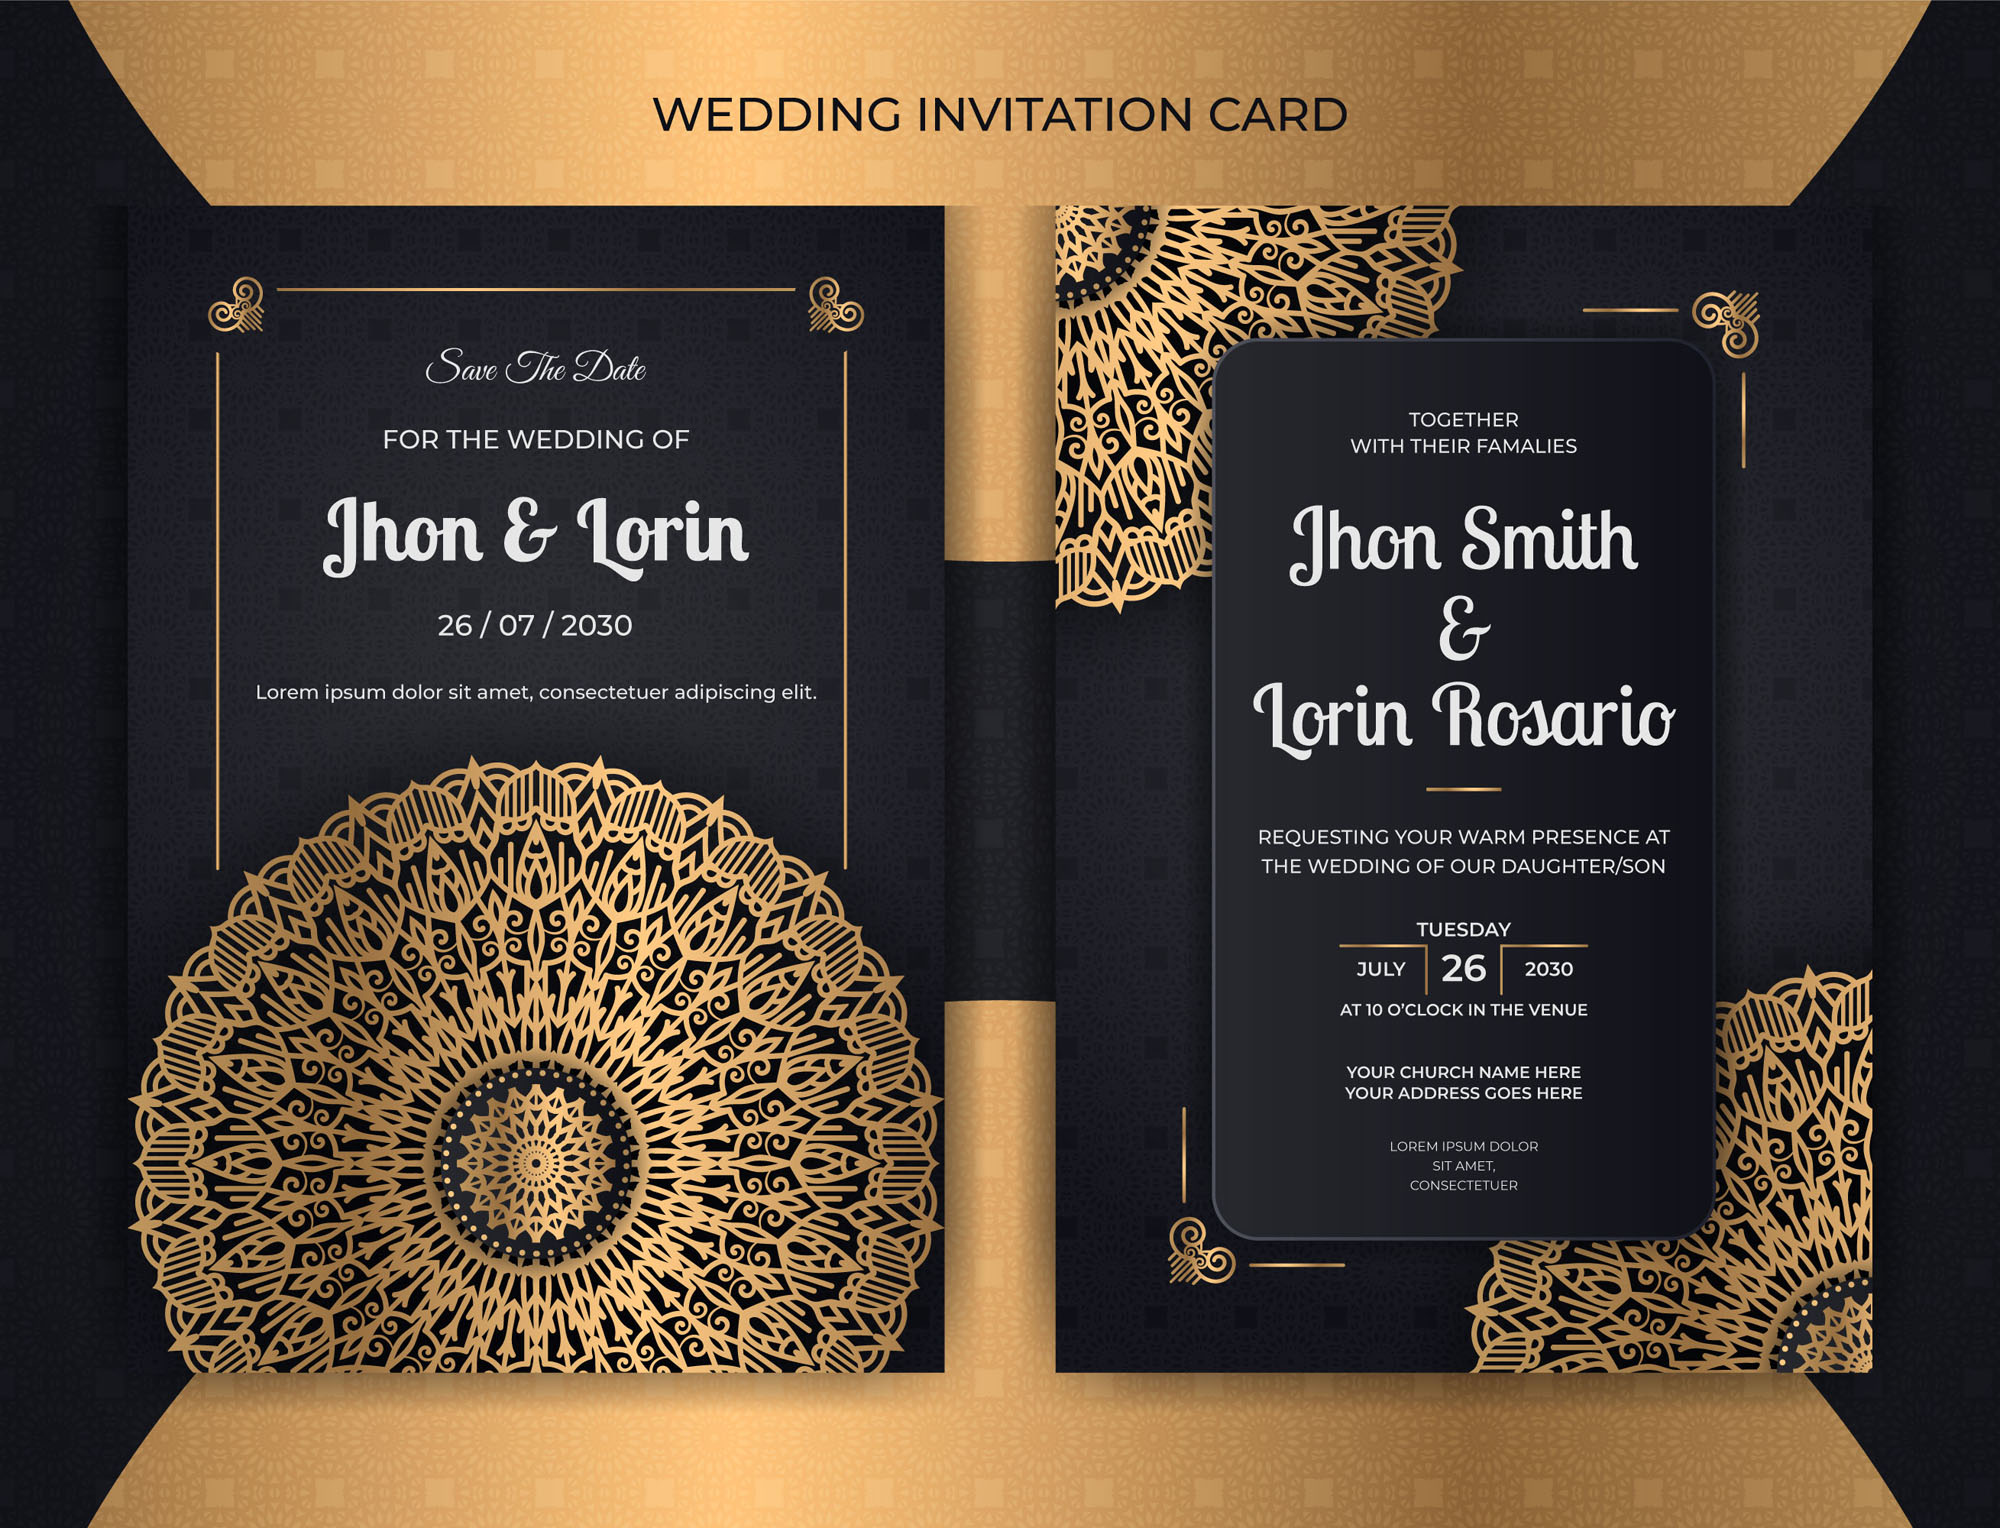 4 In One Royal Luxury Wedding Invitation Card Only In $7, beautiful invitations.